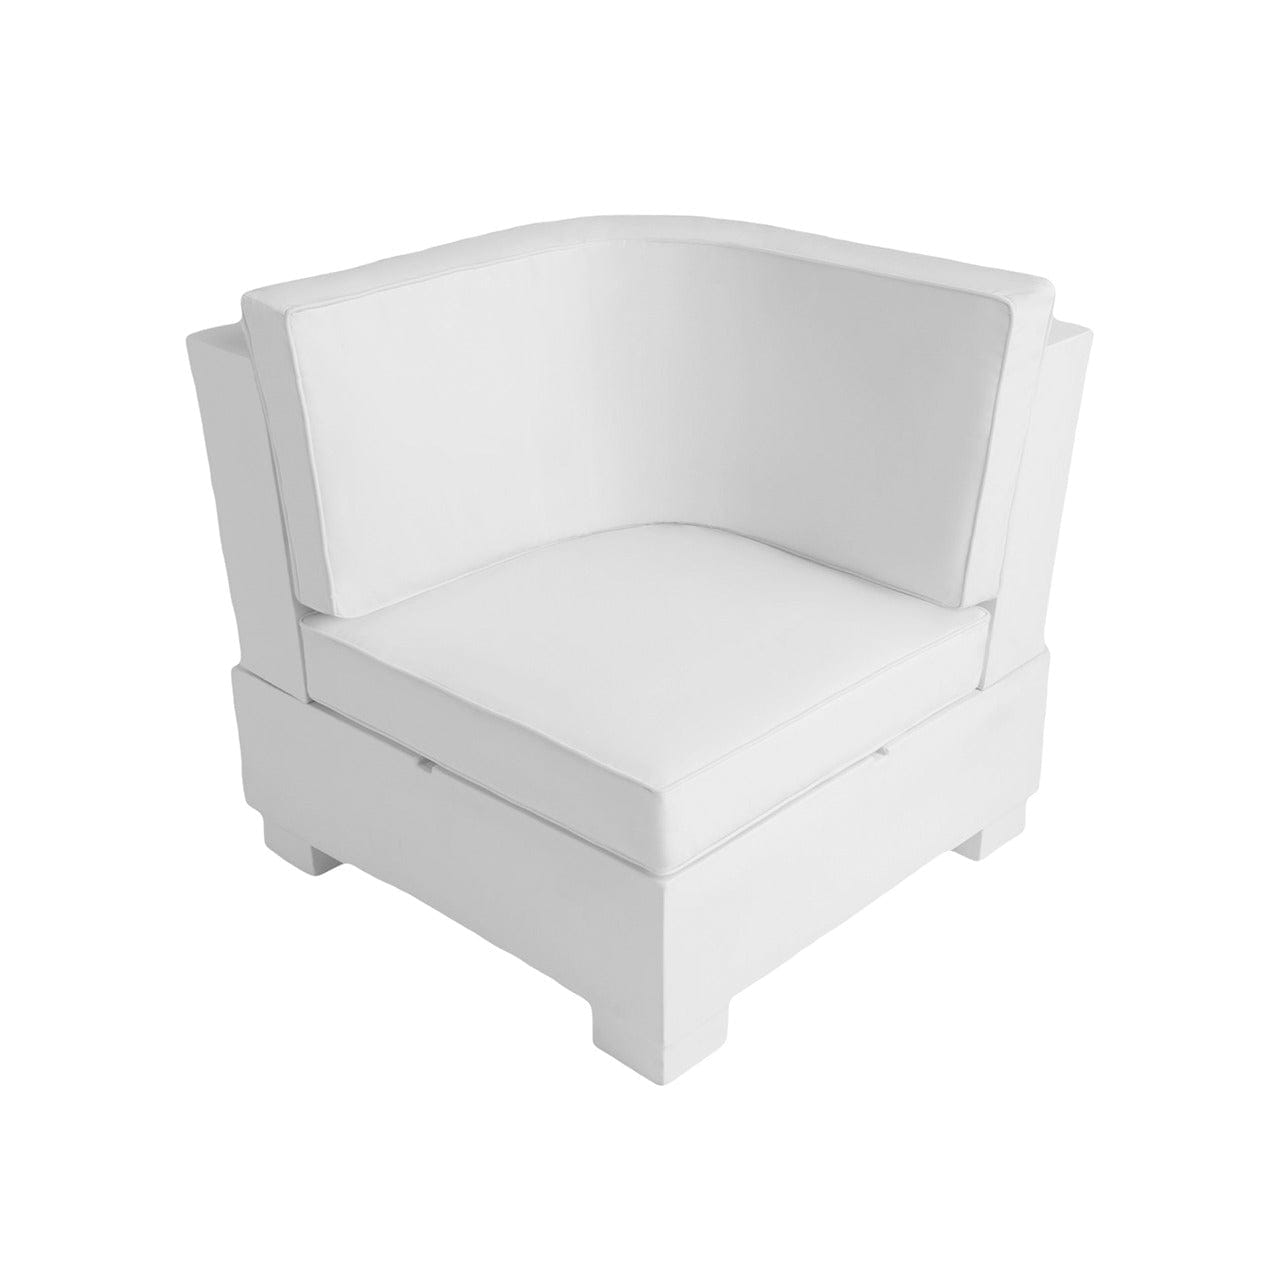 Ledge Lounger 3 Piece in pool Sectional Sofa